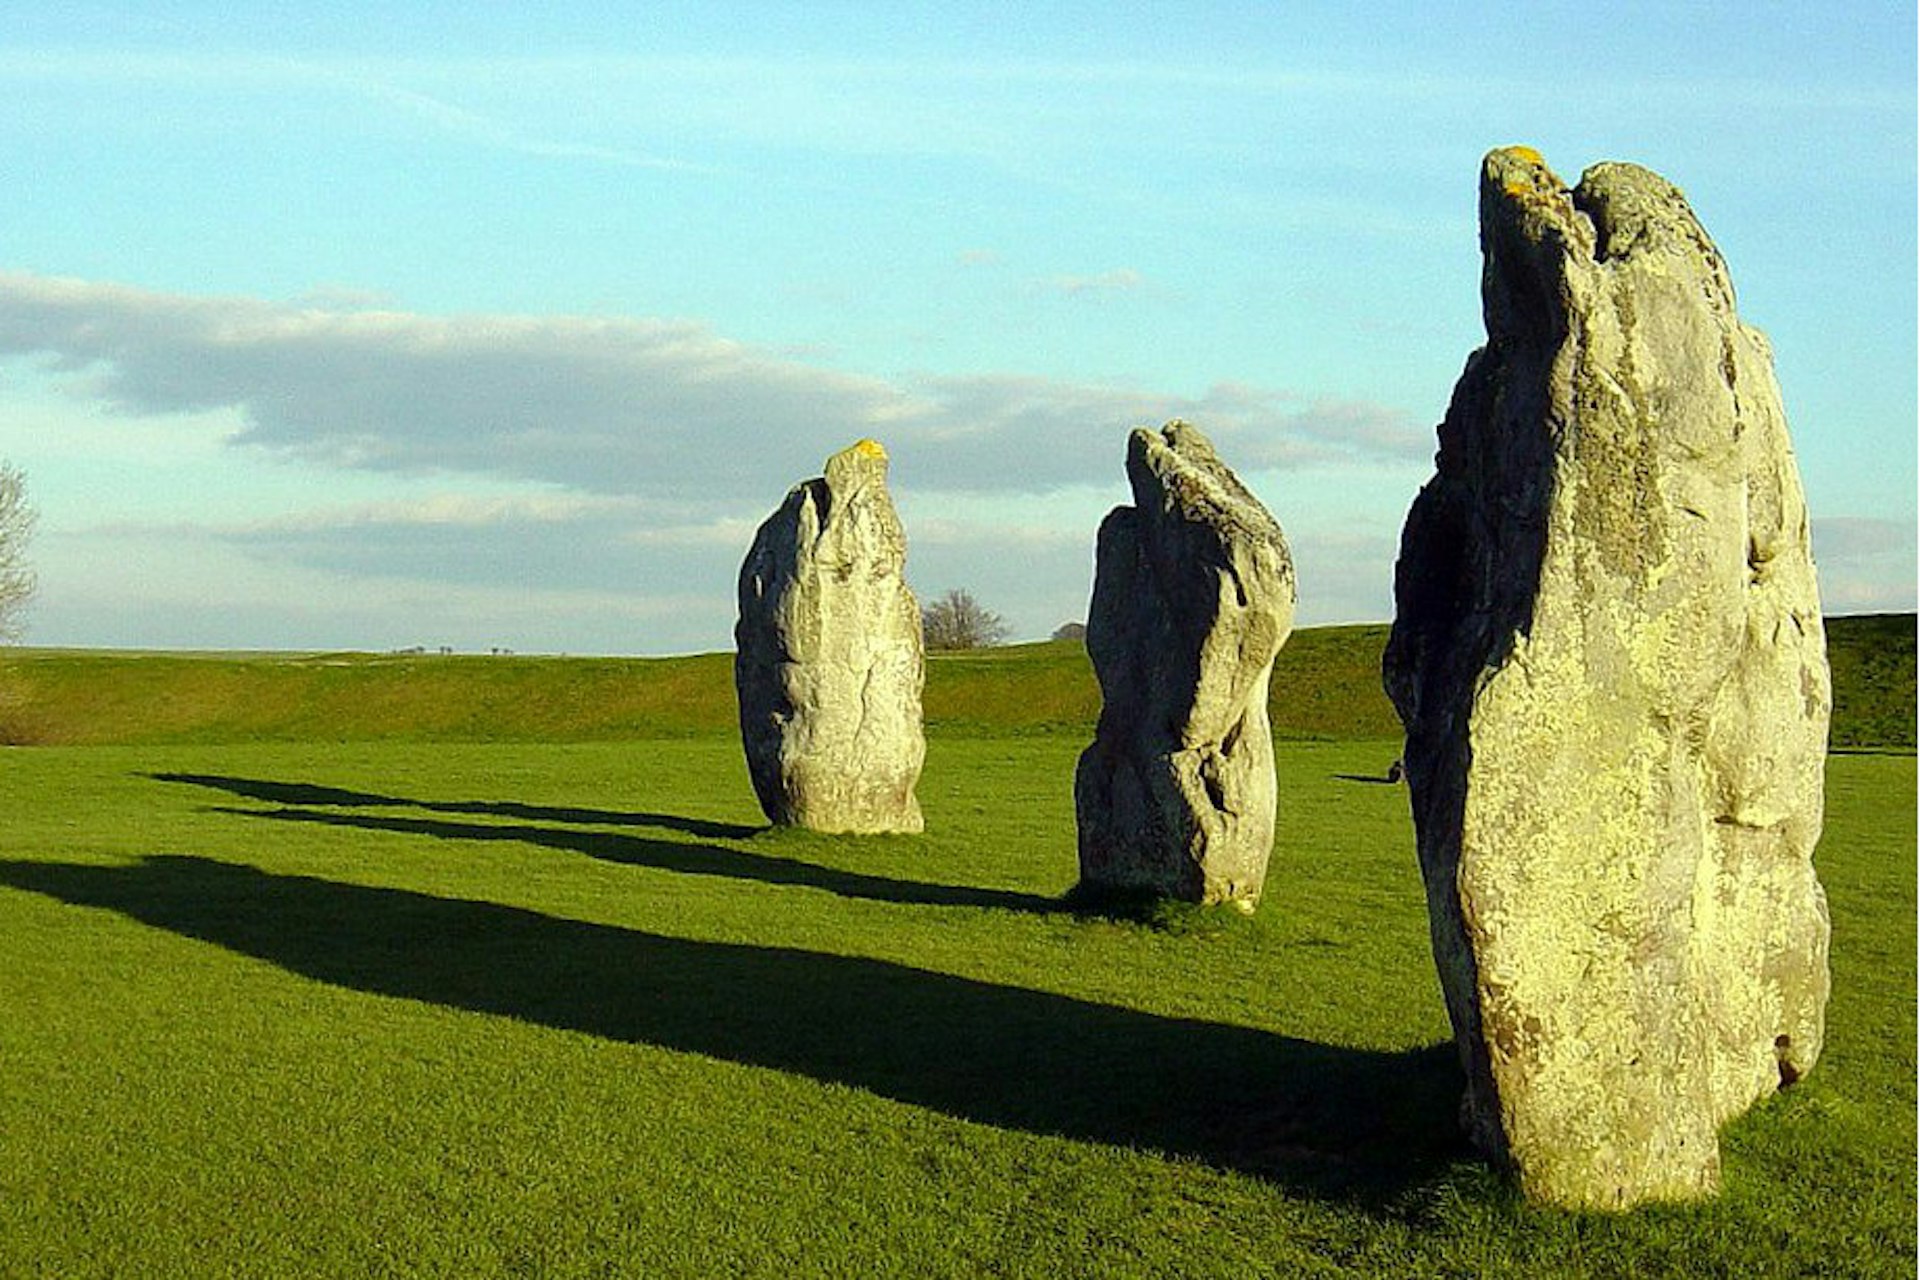 The standing stones at Avebury. Image by John Nuttall / CC BY 2.0